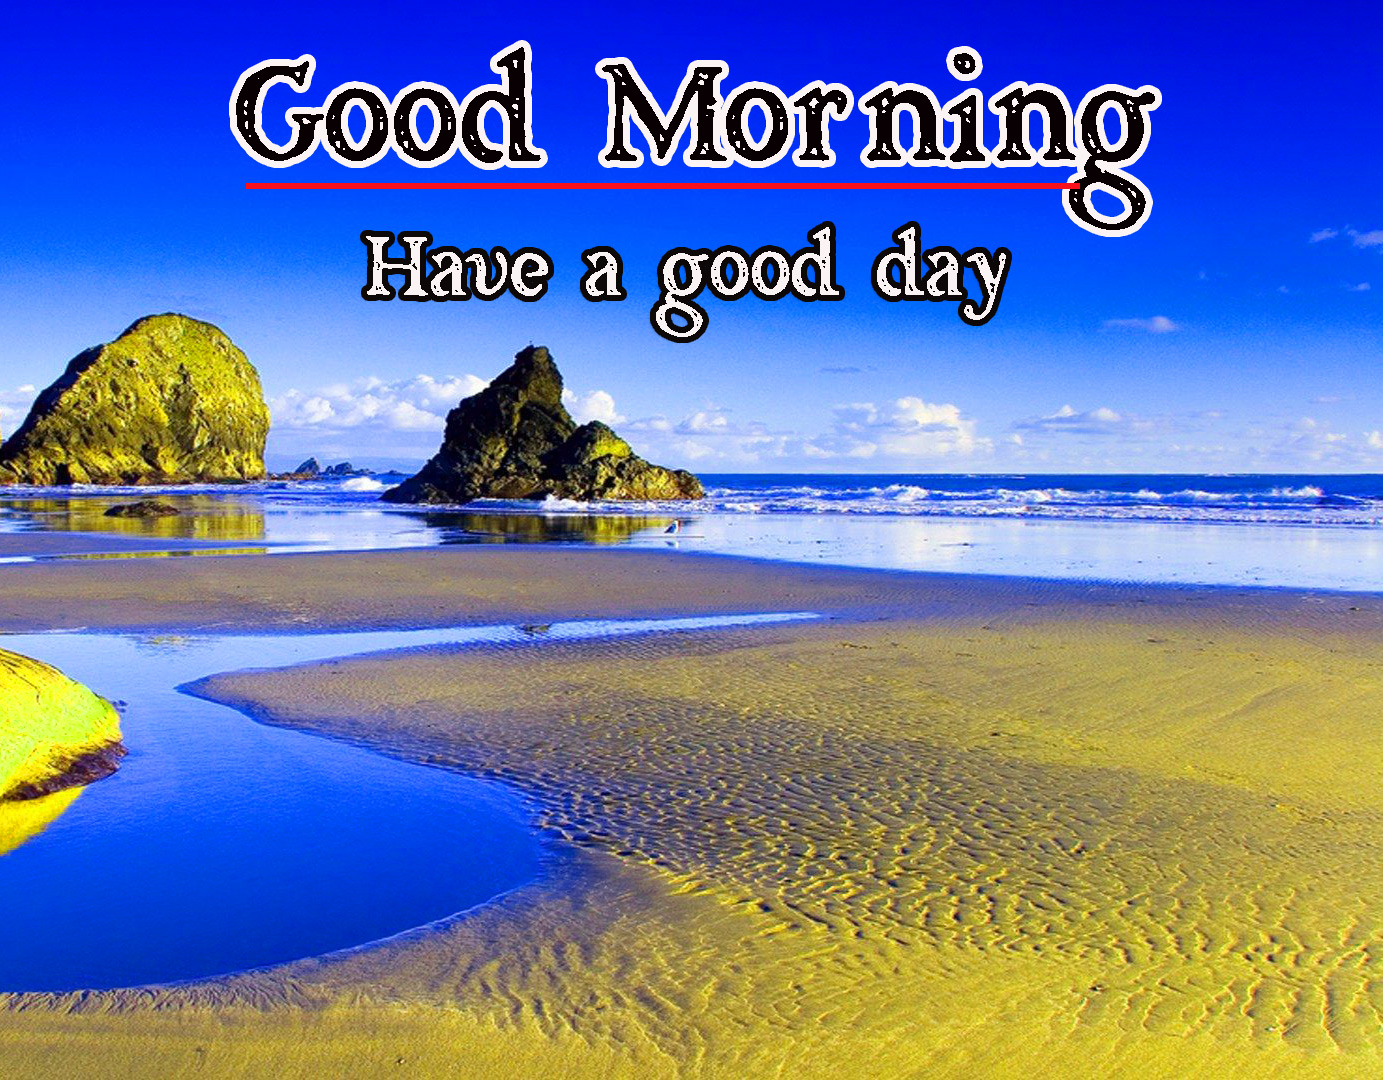 Very Good Morning Images Wallpaper pics Download 